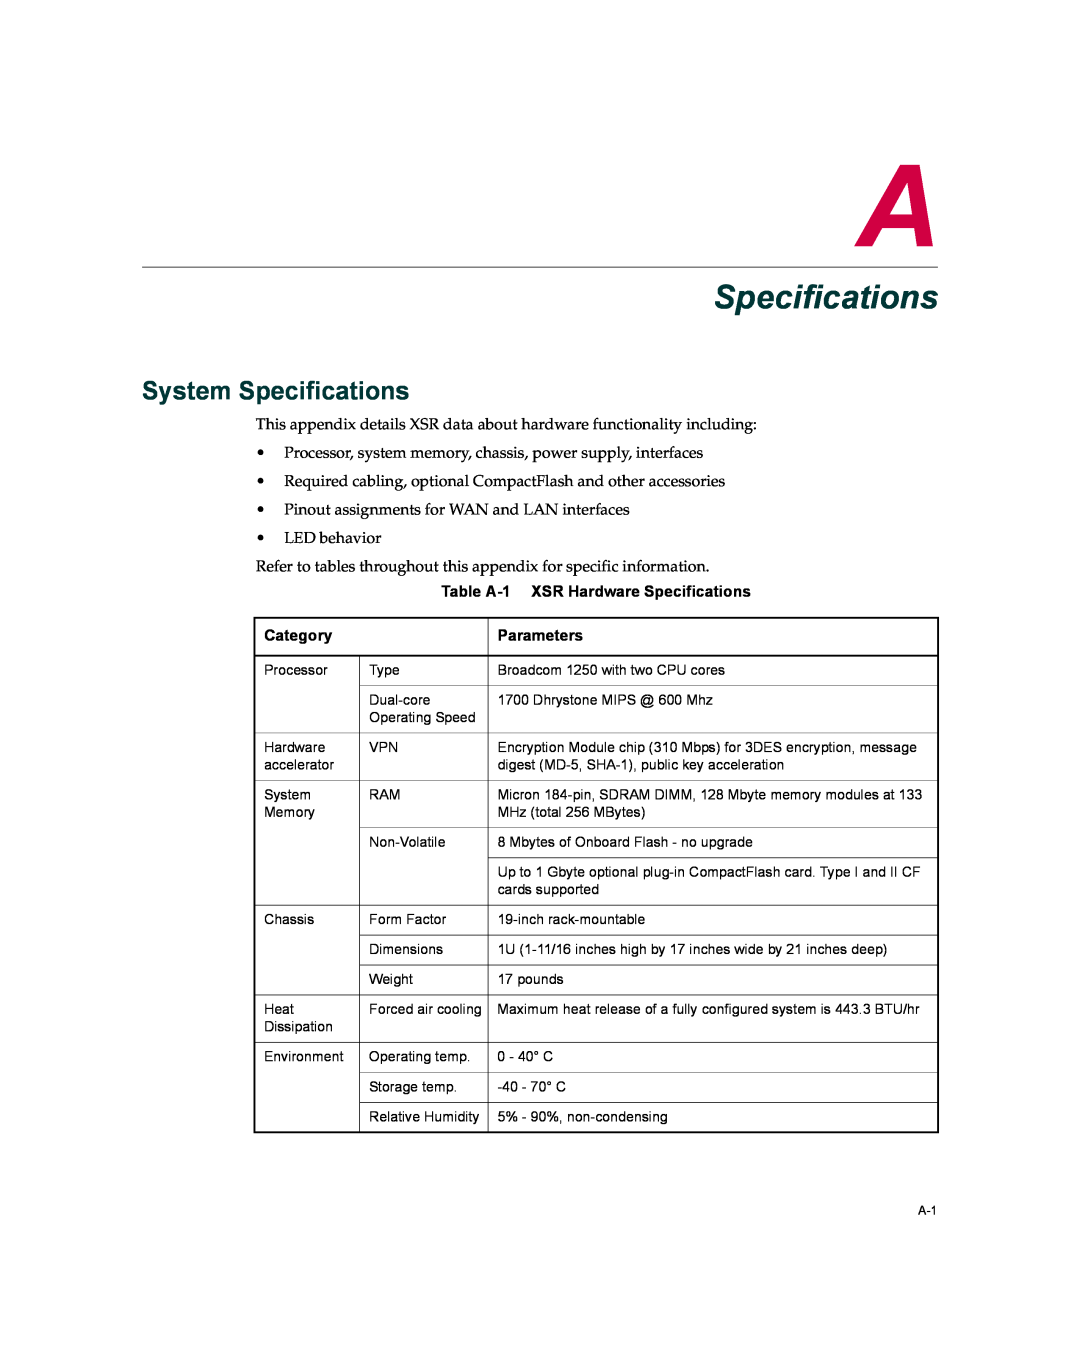 Enterasys Networks XSR-3020 manual System Specifications, Table A-1 XSR Hardware Specifications, Category, Parameters 